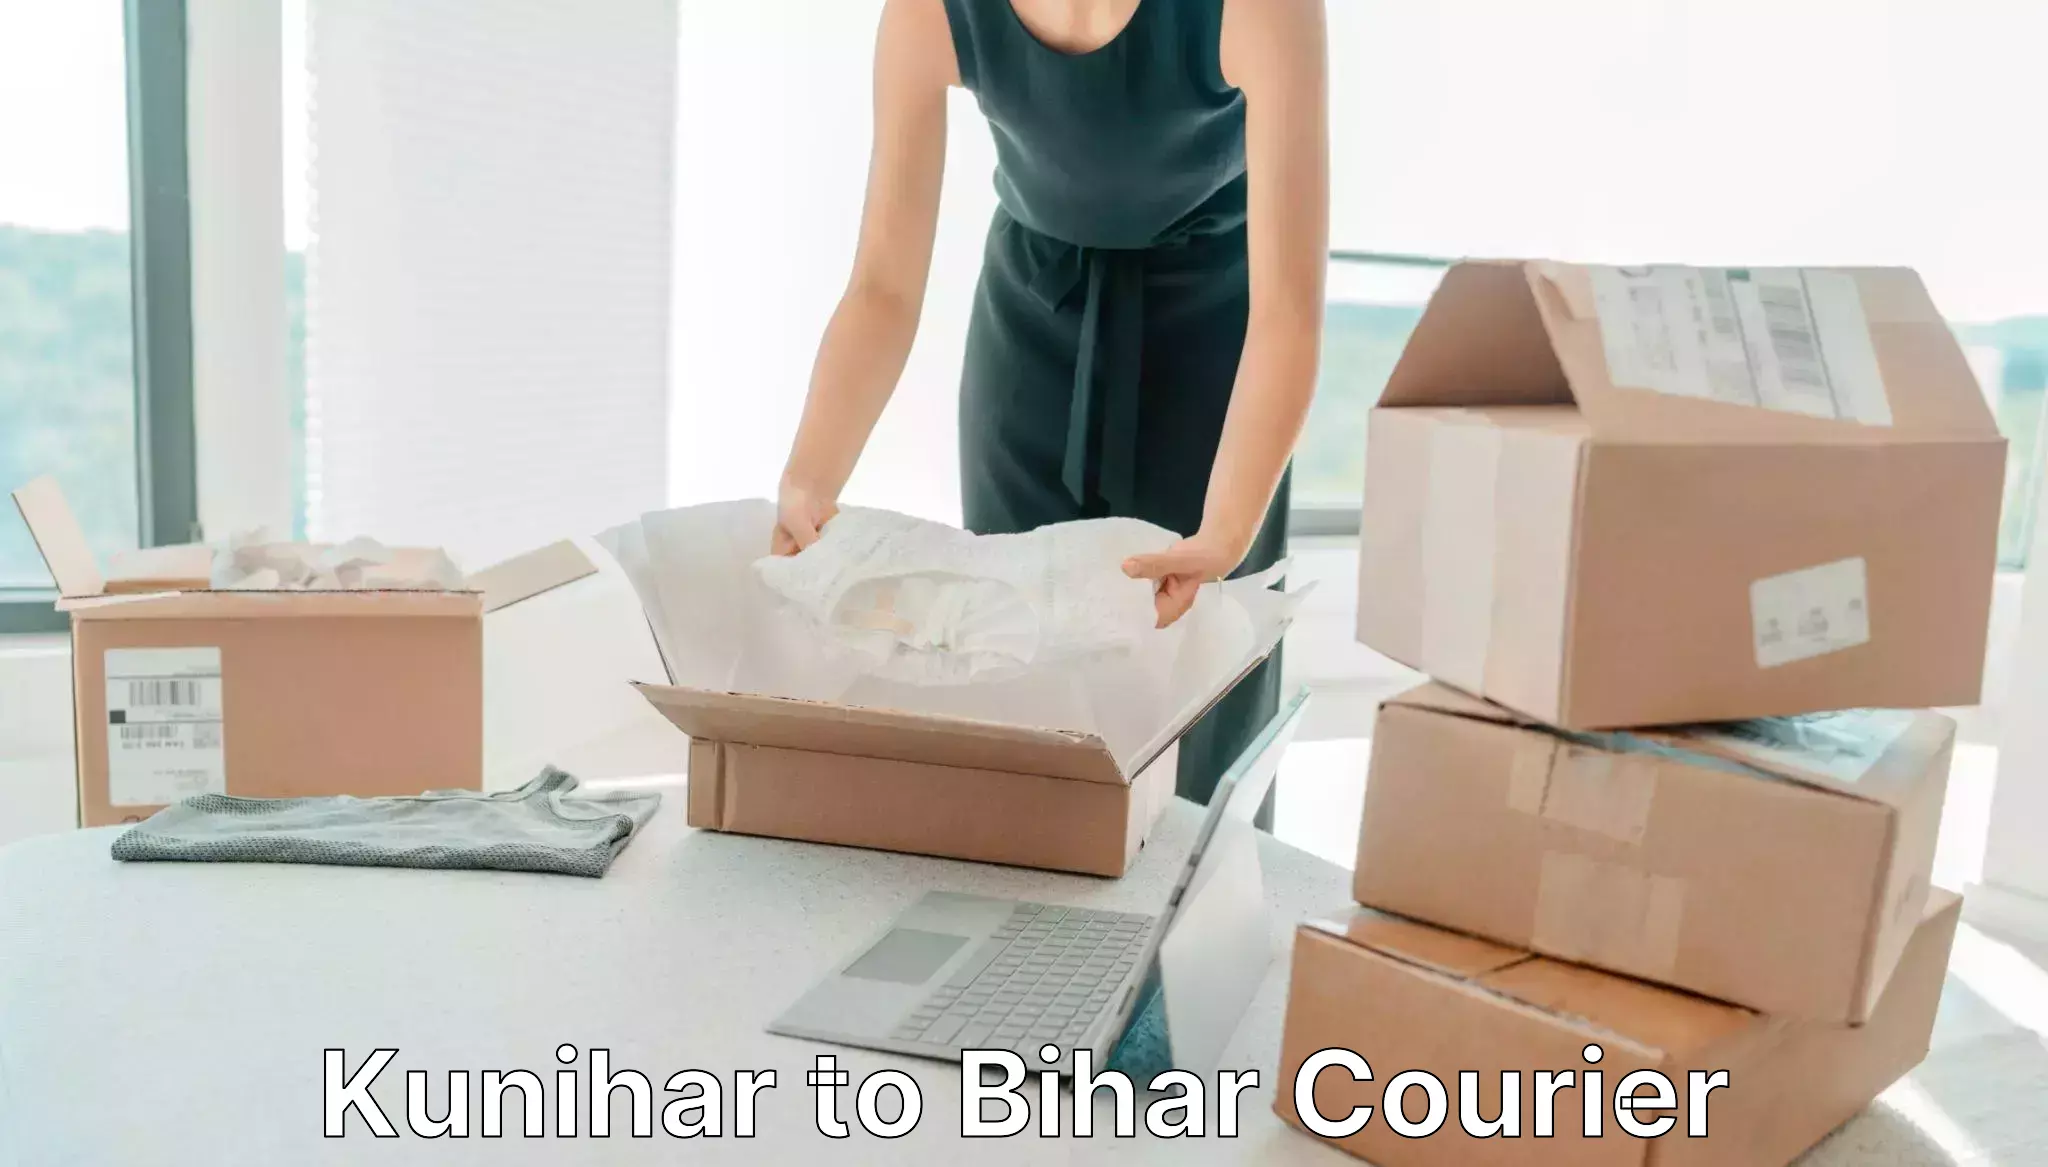 Corporate courier solutions in Kunihar to Mairwa